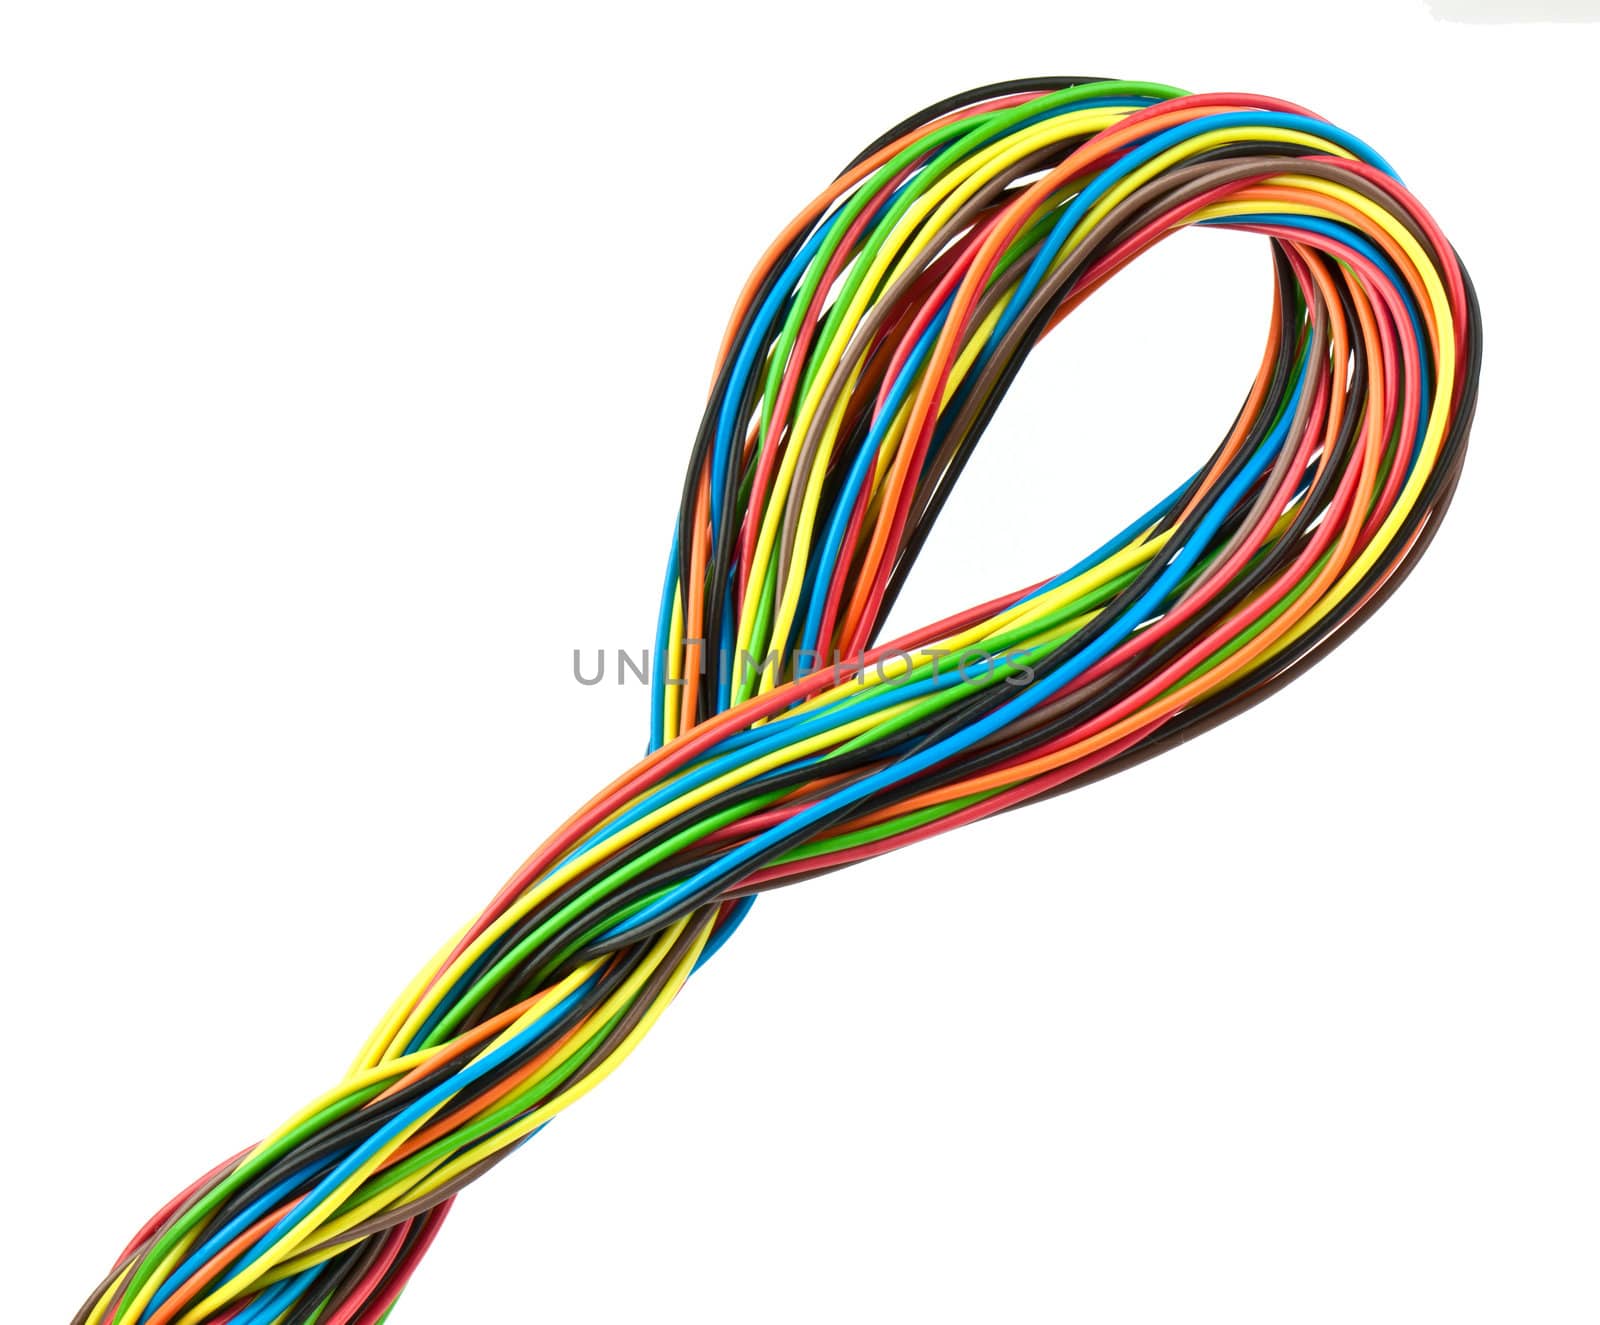 Colour wire isolated on white bacground